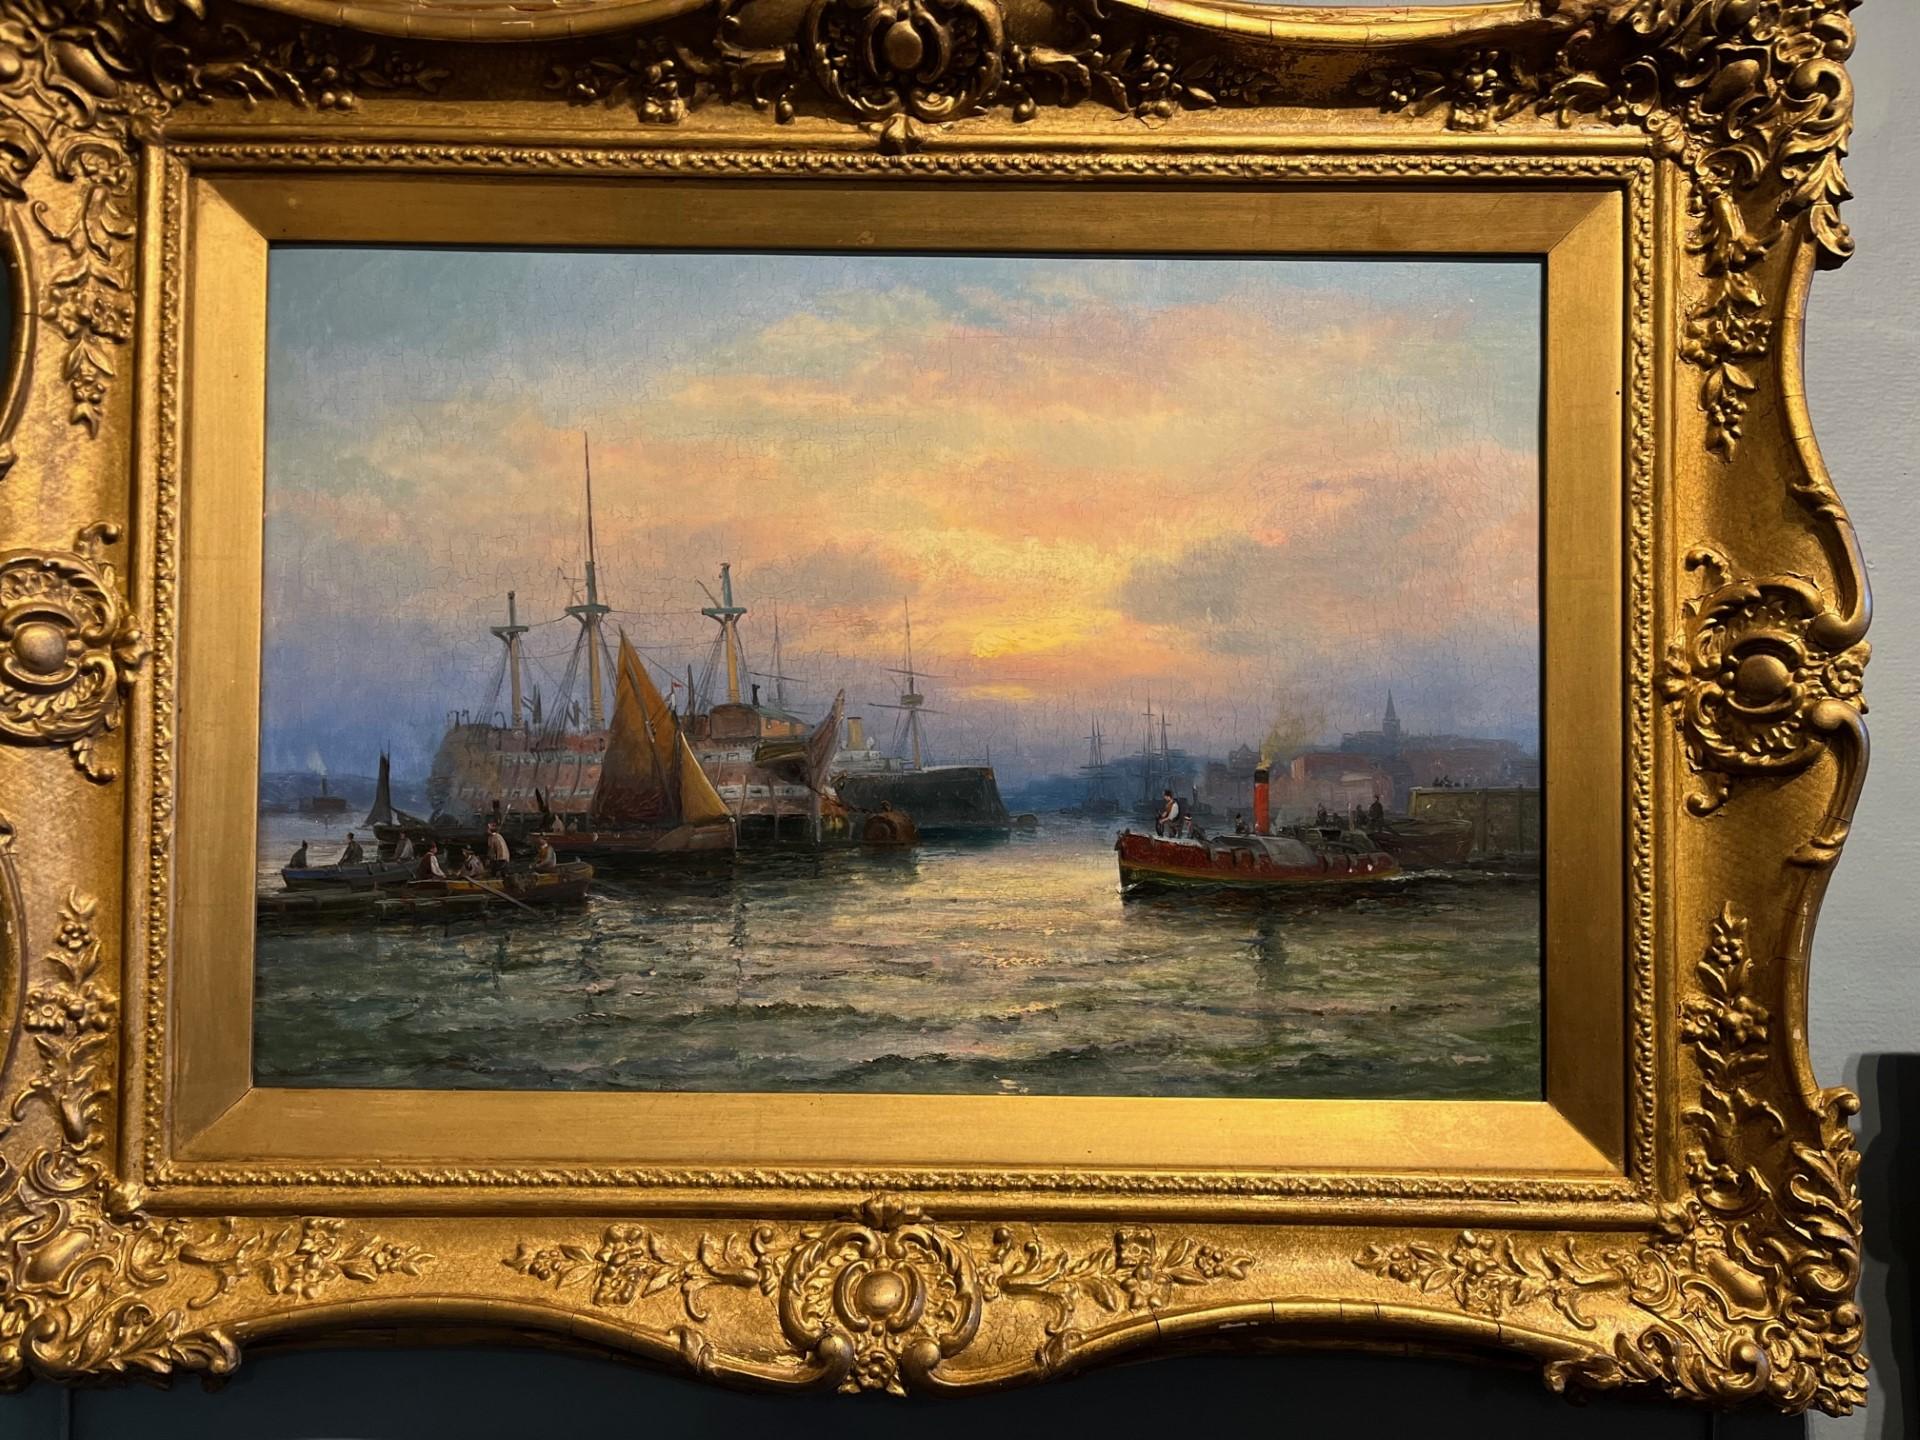 Old Prison Hulk at Sunset on the Medway, England and other shipping Oil Painting (peinture à l'huile) - Art de William Thornley